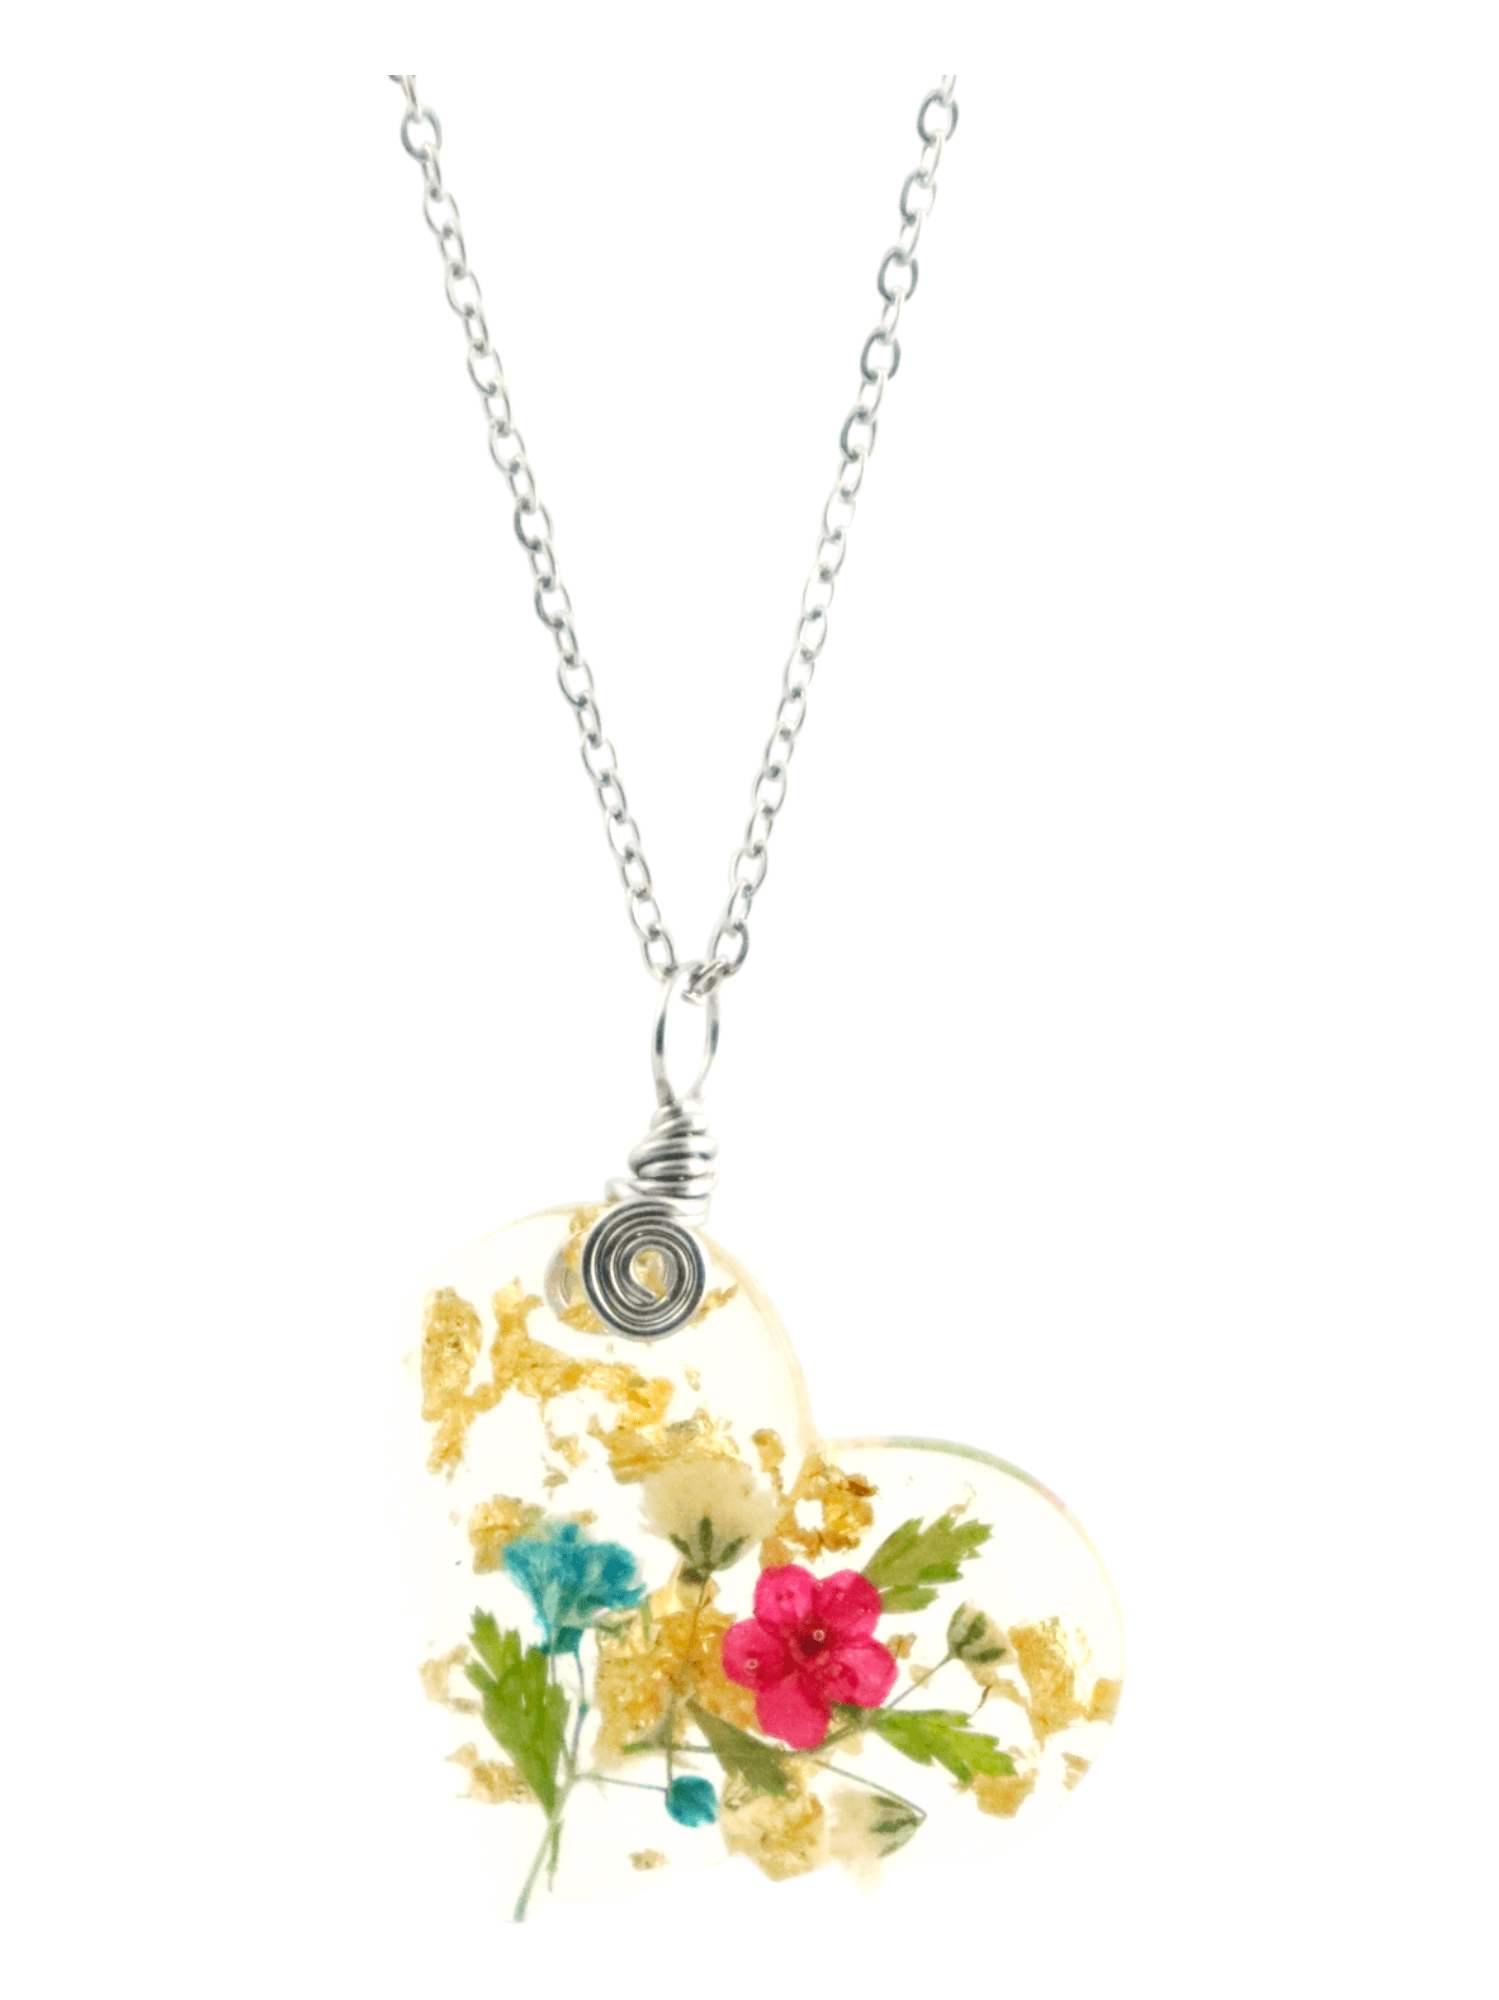 eart-Pendant-Real-Flowers-And-Gold-Flakes-Delicate-Stainless-Steel-Chain-Kaleidoscopes-And-Polka-Dots